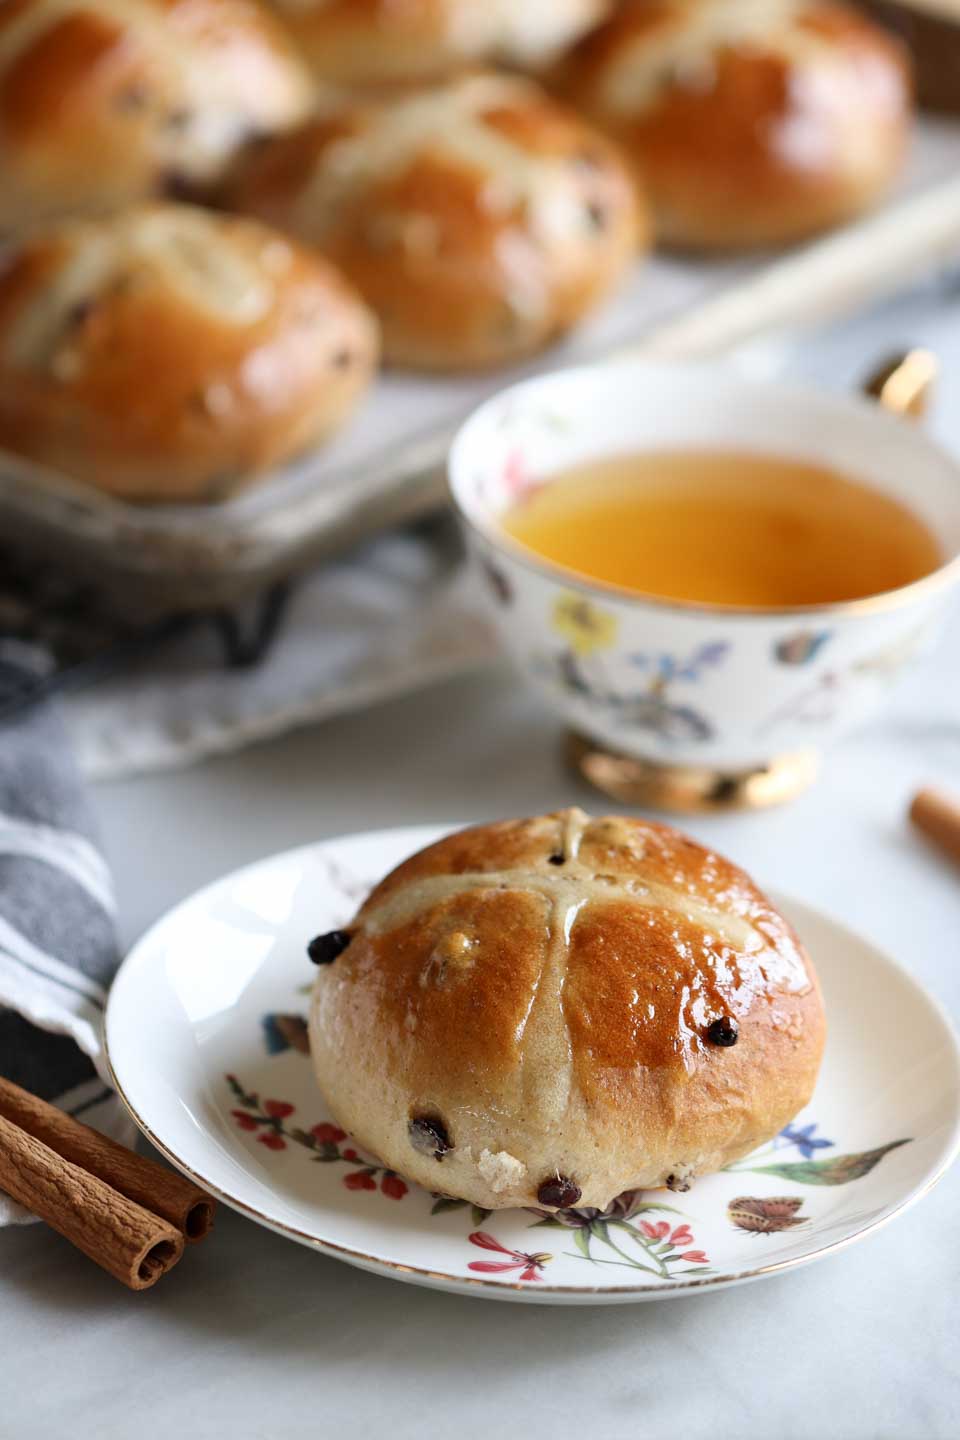 Eggless Hot Cross Buns - a spiced bun with cinnamon, cloves and currants.  An Easter favorite.